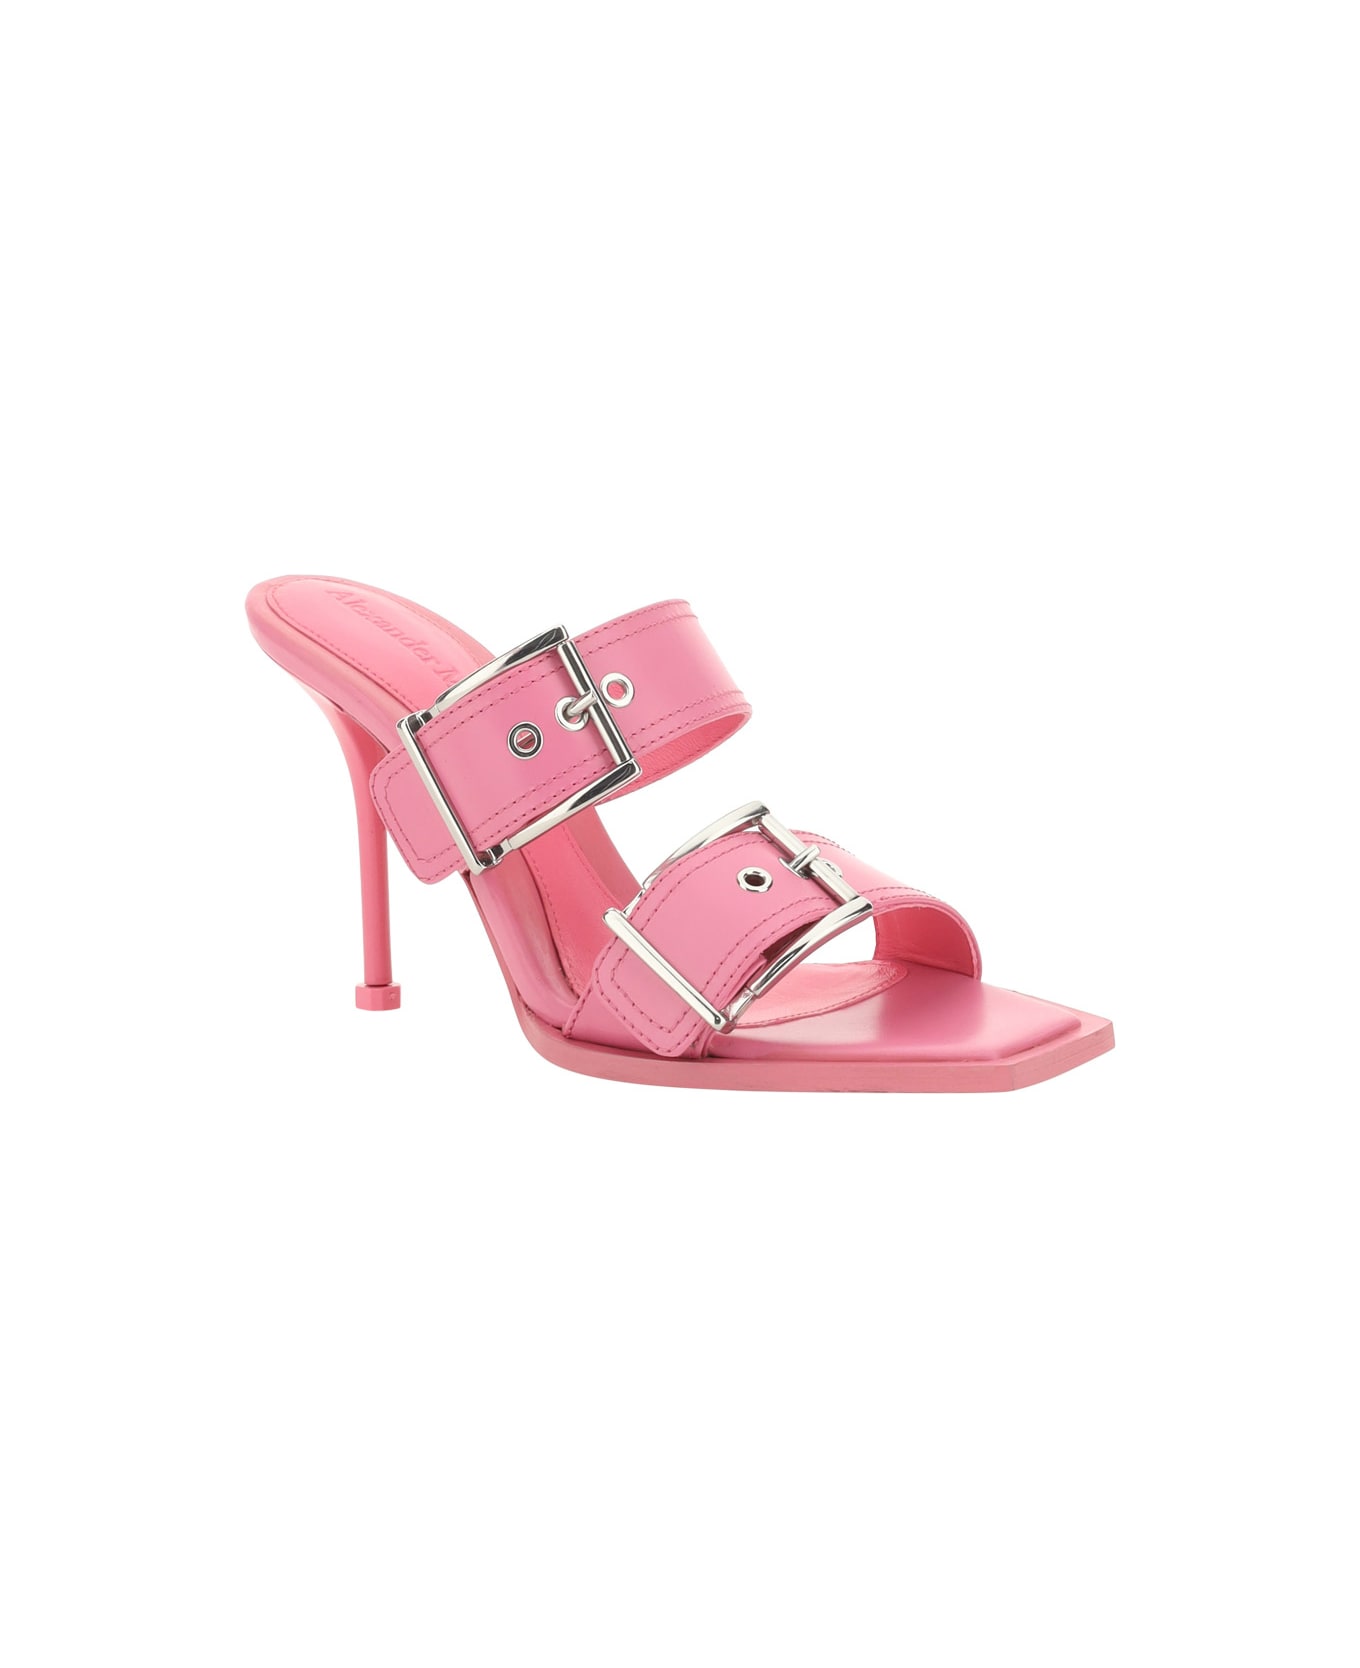 Alexander McQueen Leather Mules - Sugar Pink/silver サンダル